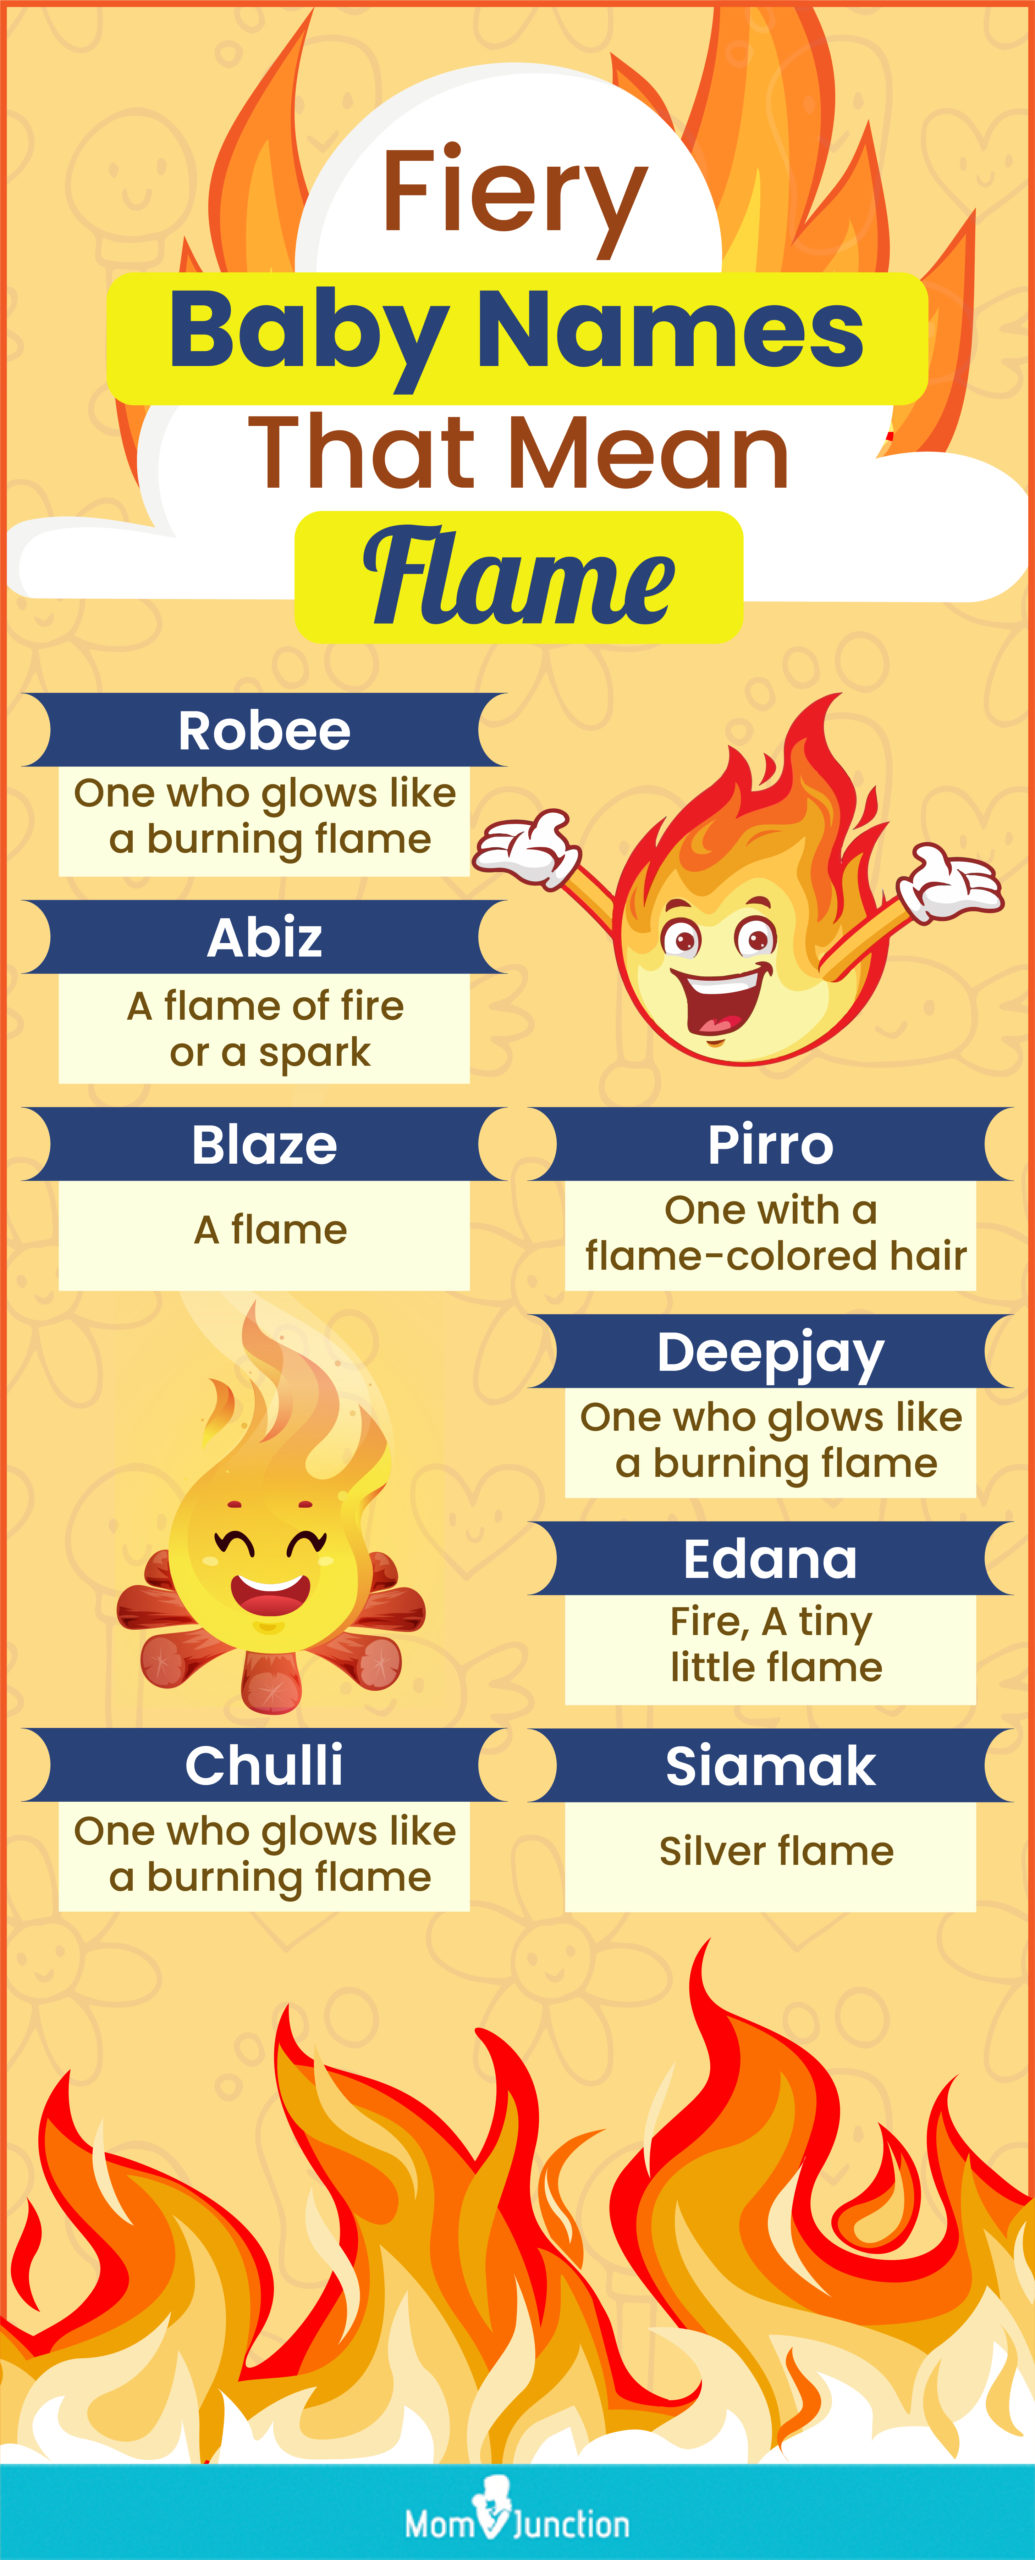 fiery baby names that mean flame (infographic)